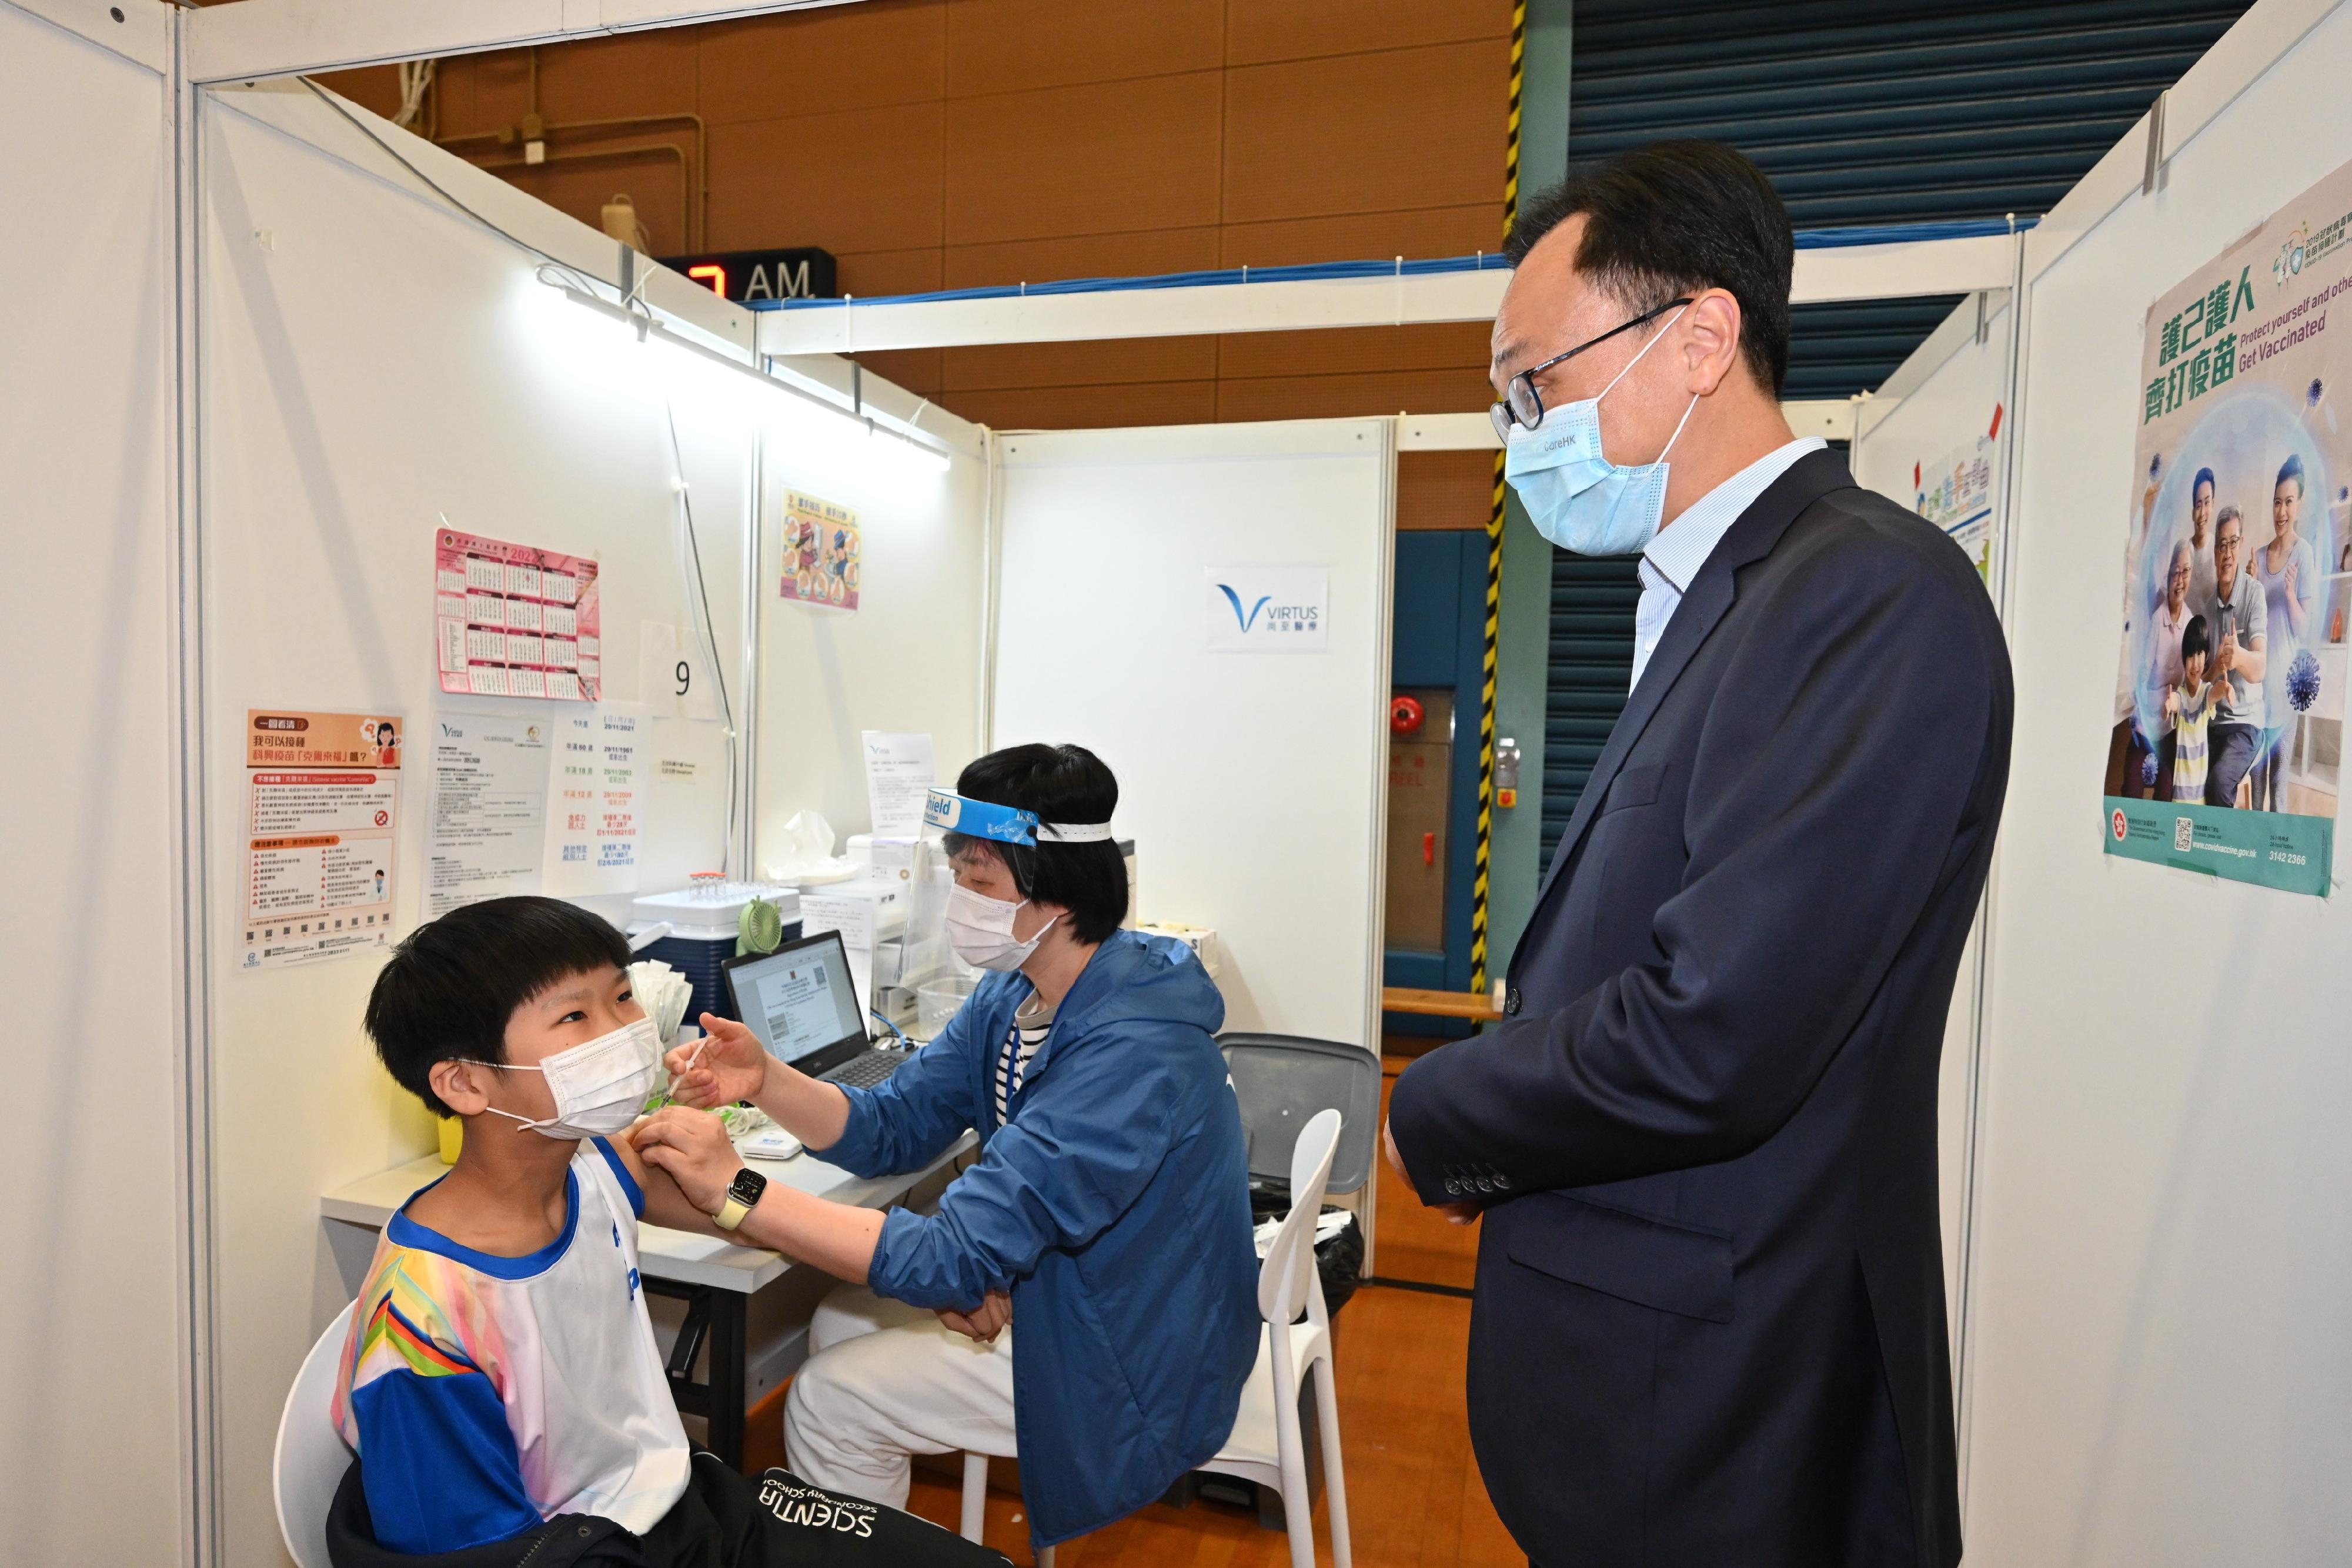 Persons aged between 12 and 17 have been able to receive the Sinovac vaccine since December 2. Scientia Secondary School is the first school to have students vaccinated with the Sinovac vaccine at a Community Vaccination Centre (CVC) through group booking. The Secretary for the Civil Service, Mr Patrick Nip, visited the CVC at Kwun Chung Sports Centre this afternoon (December 3) to view the administering of the vaccine to some 30 students of the school. Photo shows Mr Nip (right) chatting with a student receiving his COVID-19 vaccination.